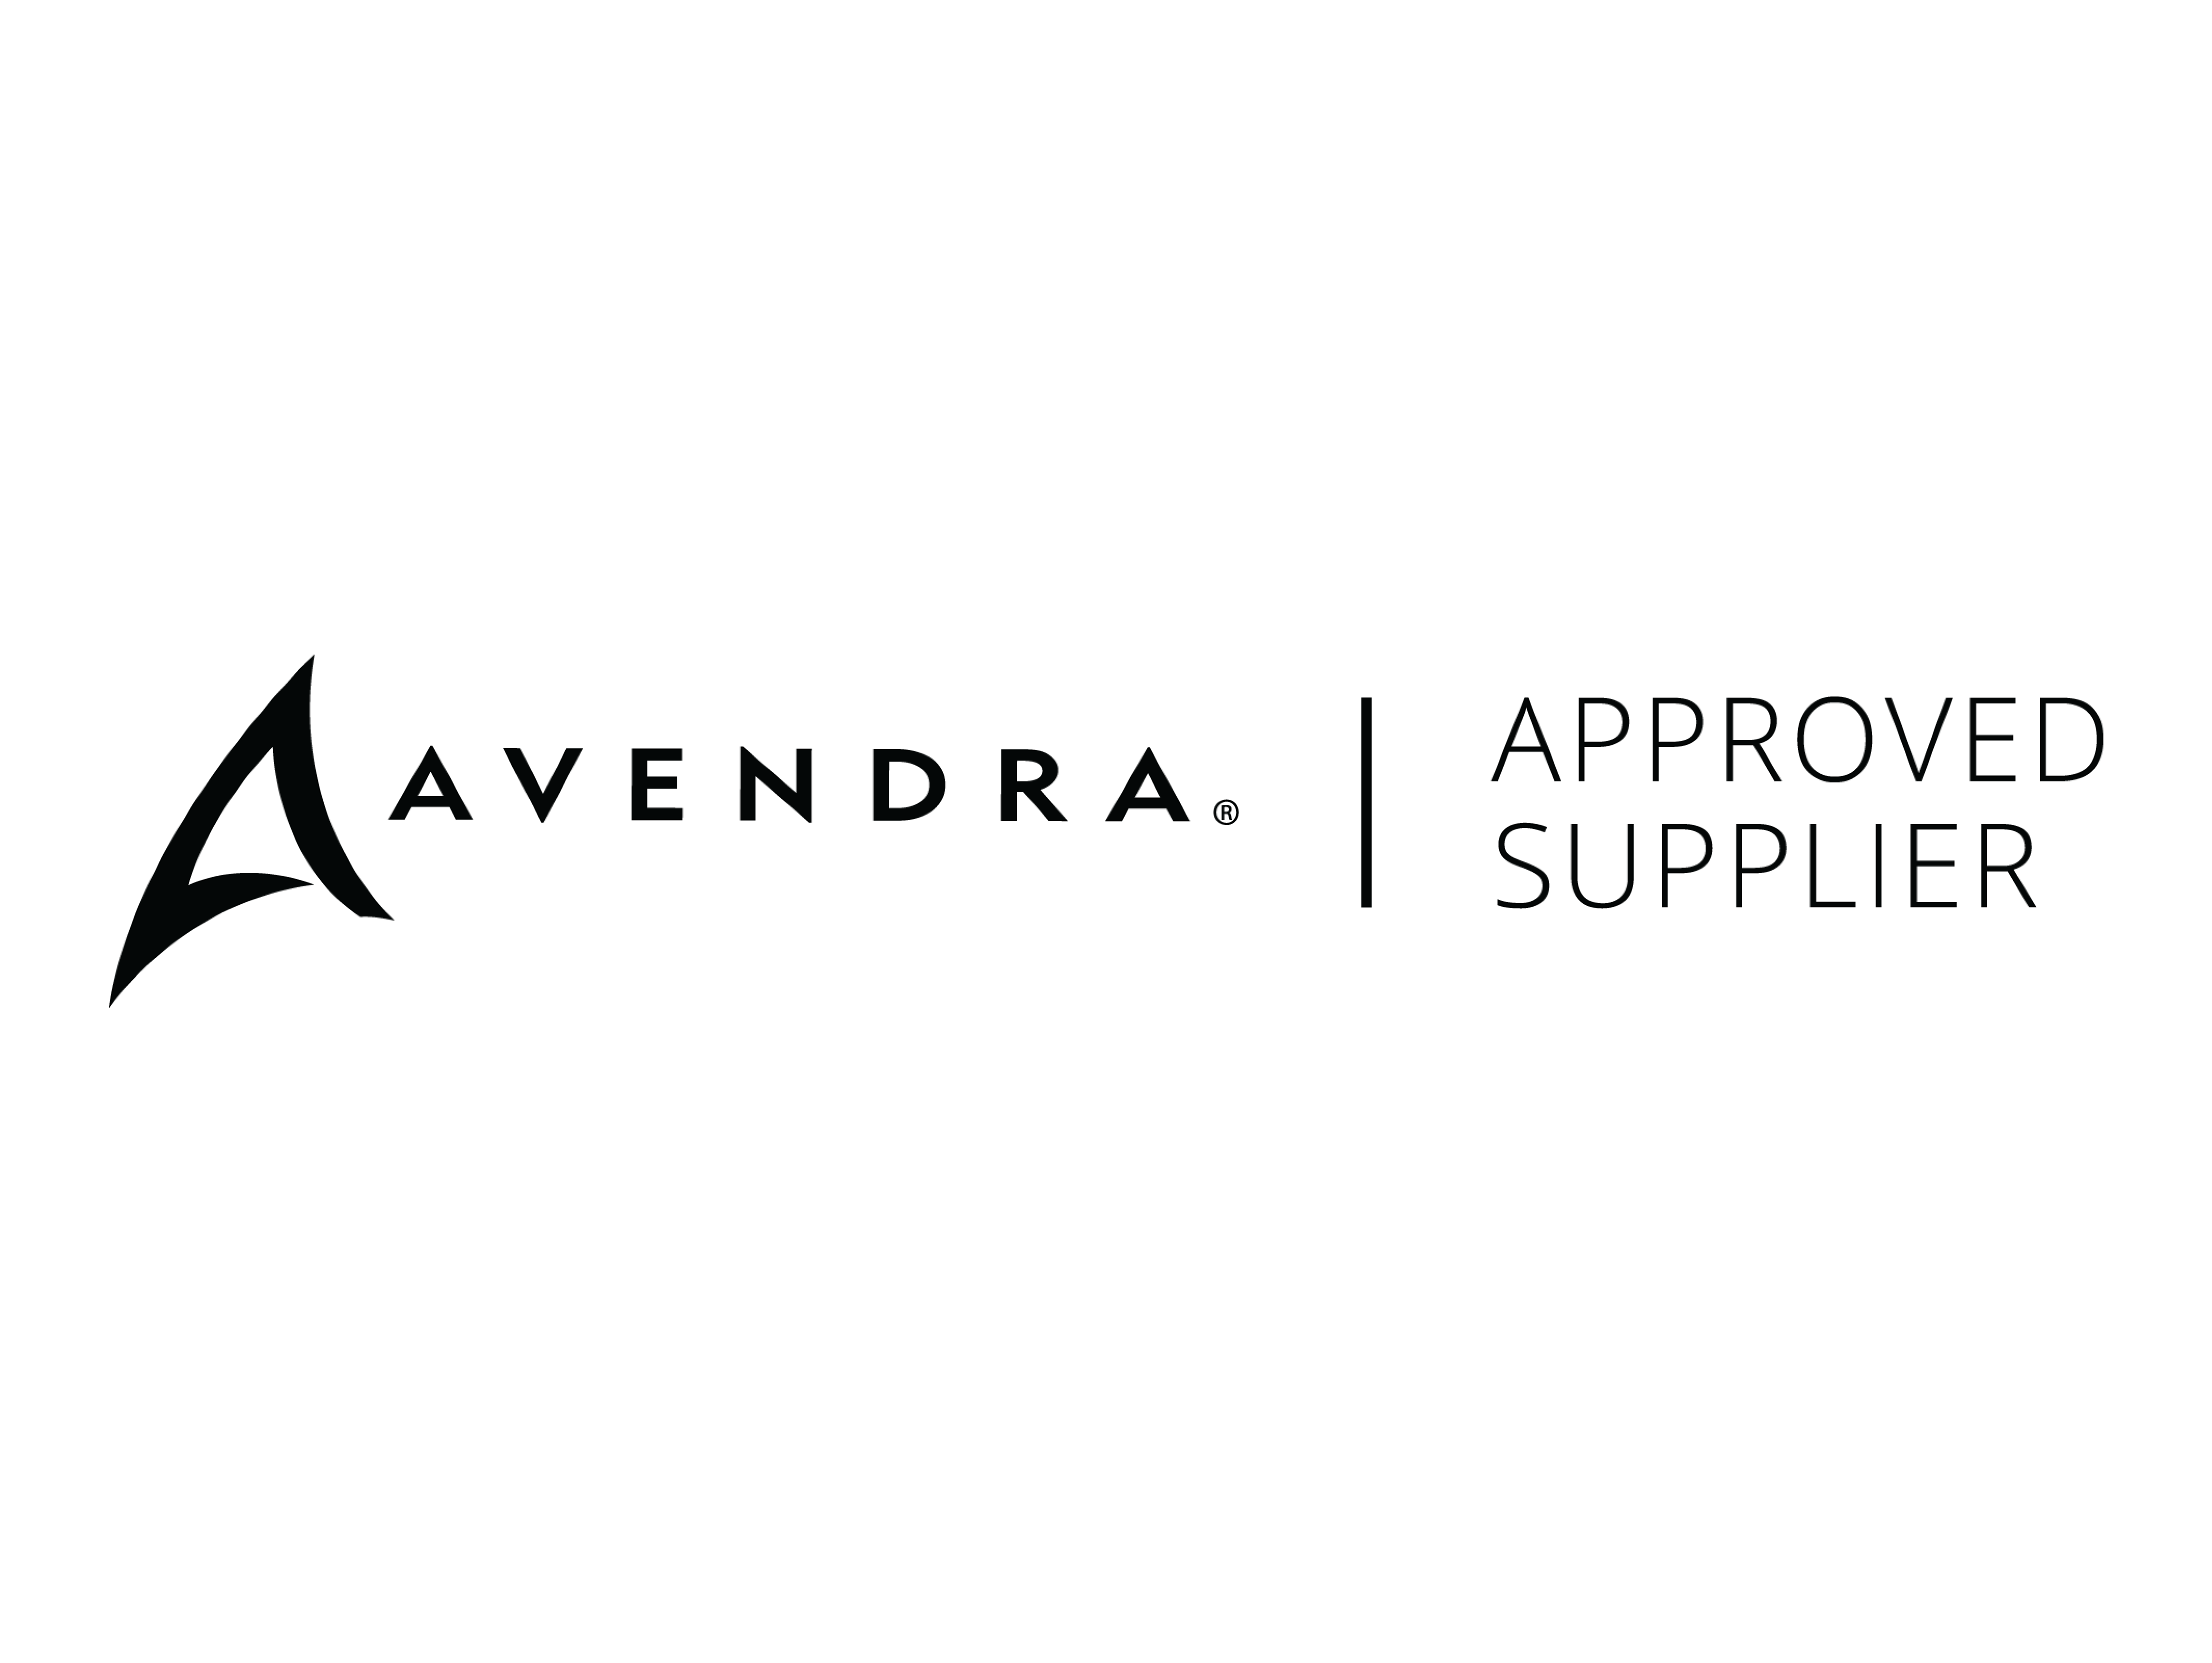 Avendra, approved supplier, logo in black ink.